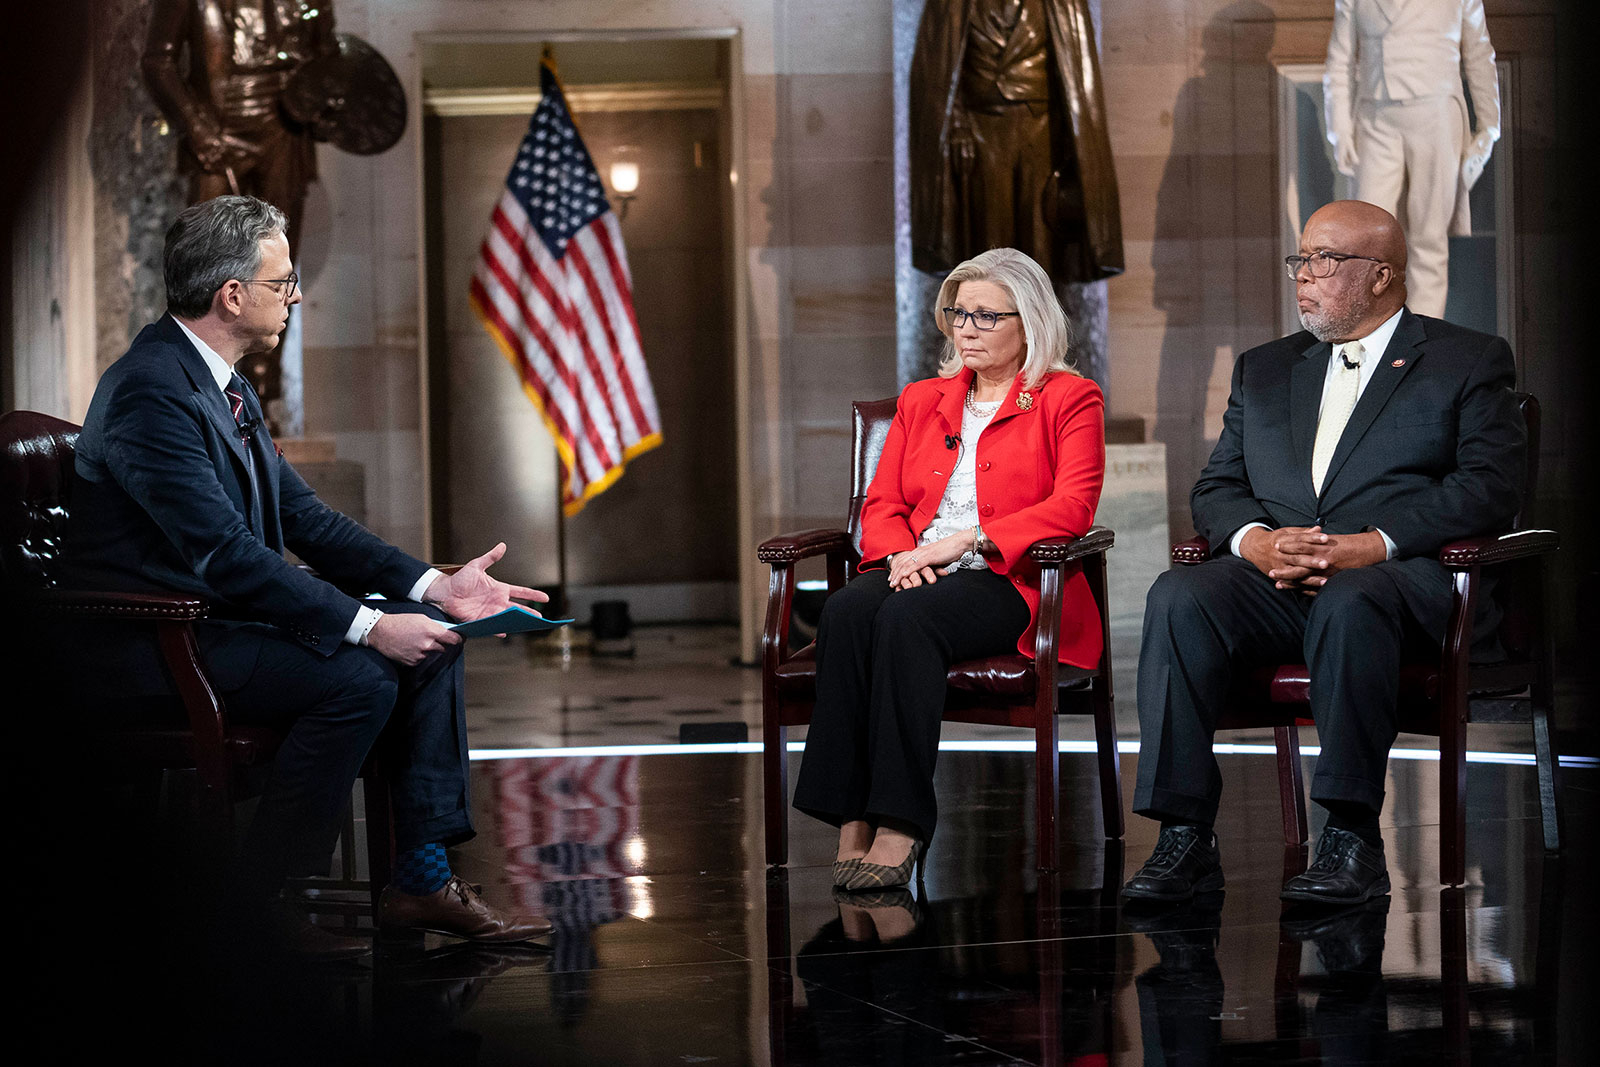 Rep. Liz Cheney and Rep. Bennie Thompson speak with CNN's Jake Tapper at the US Capitol on Thursday.